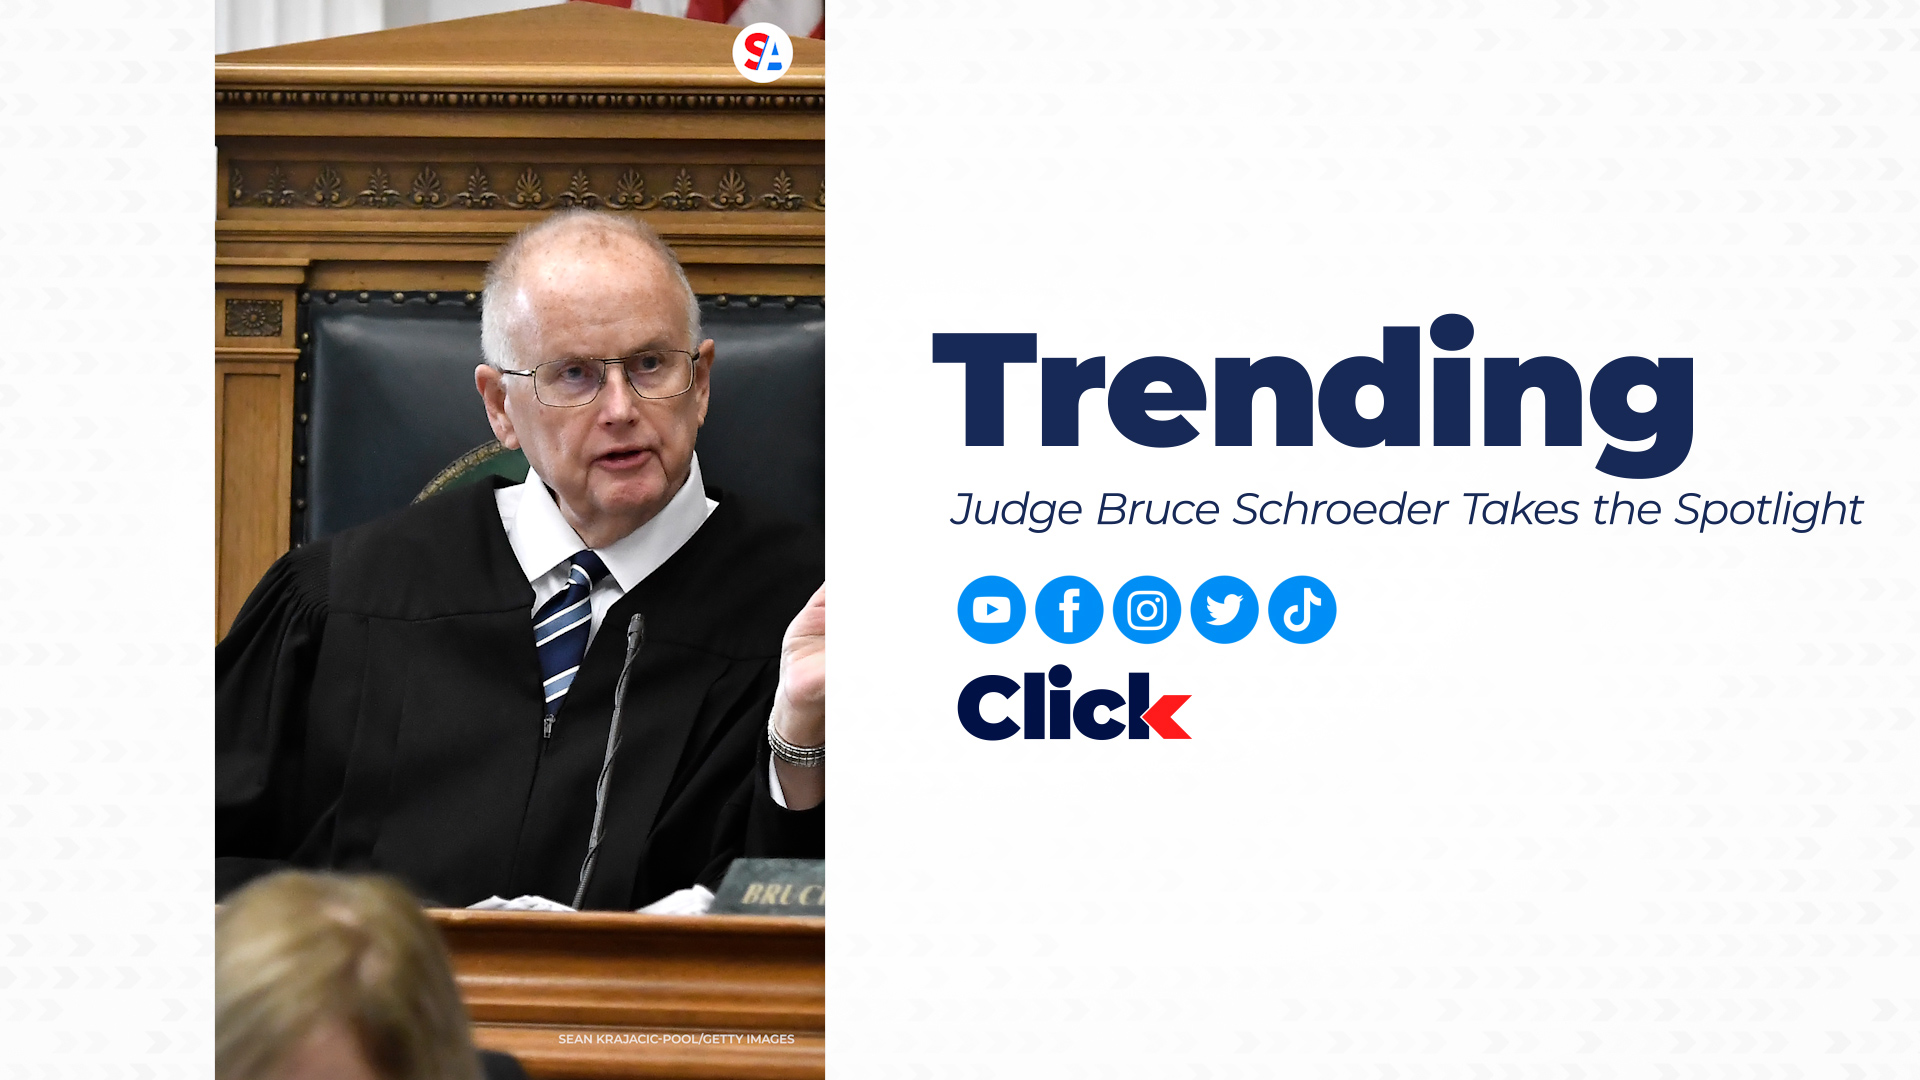 Bruce Schroeder is gaining national attention as the longest-serving circuit court judge in Wisconsin presides over the homicide trial of Kyle Rittenhouse.